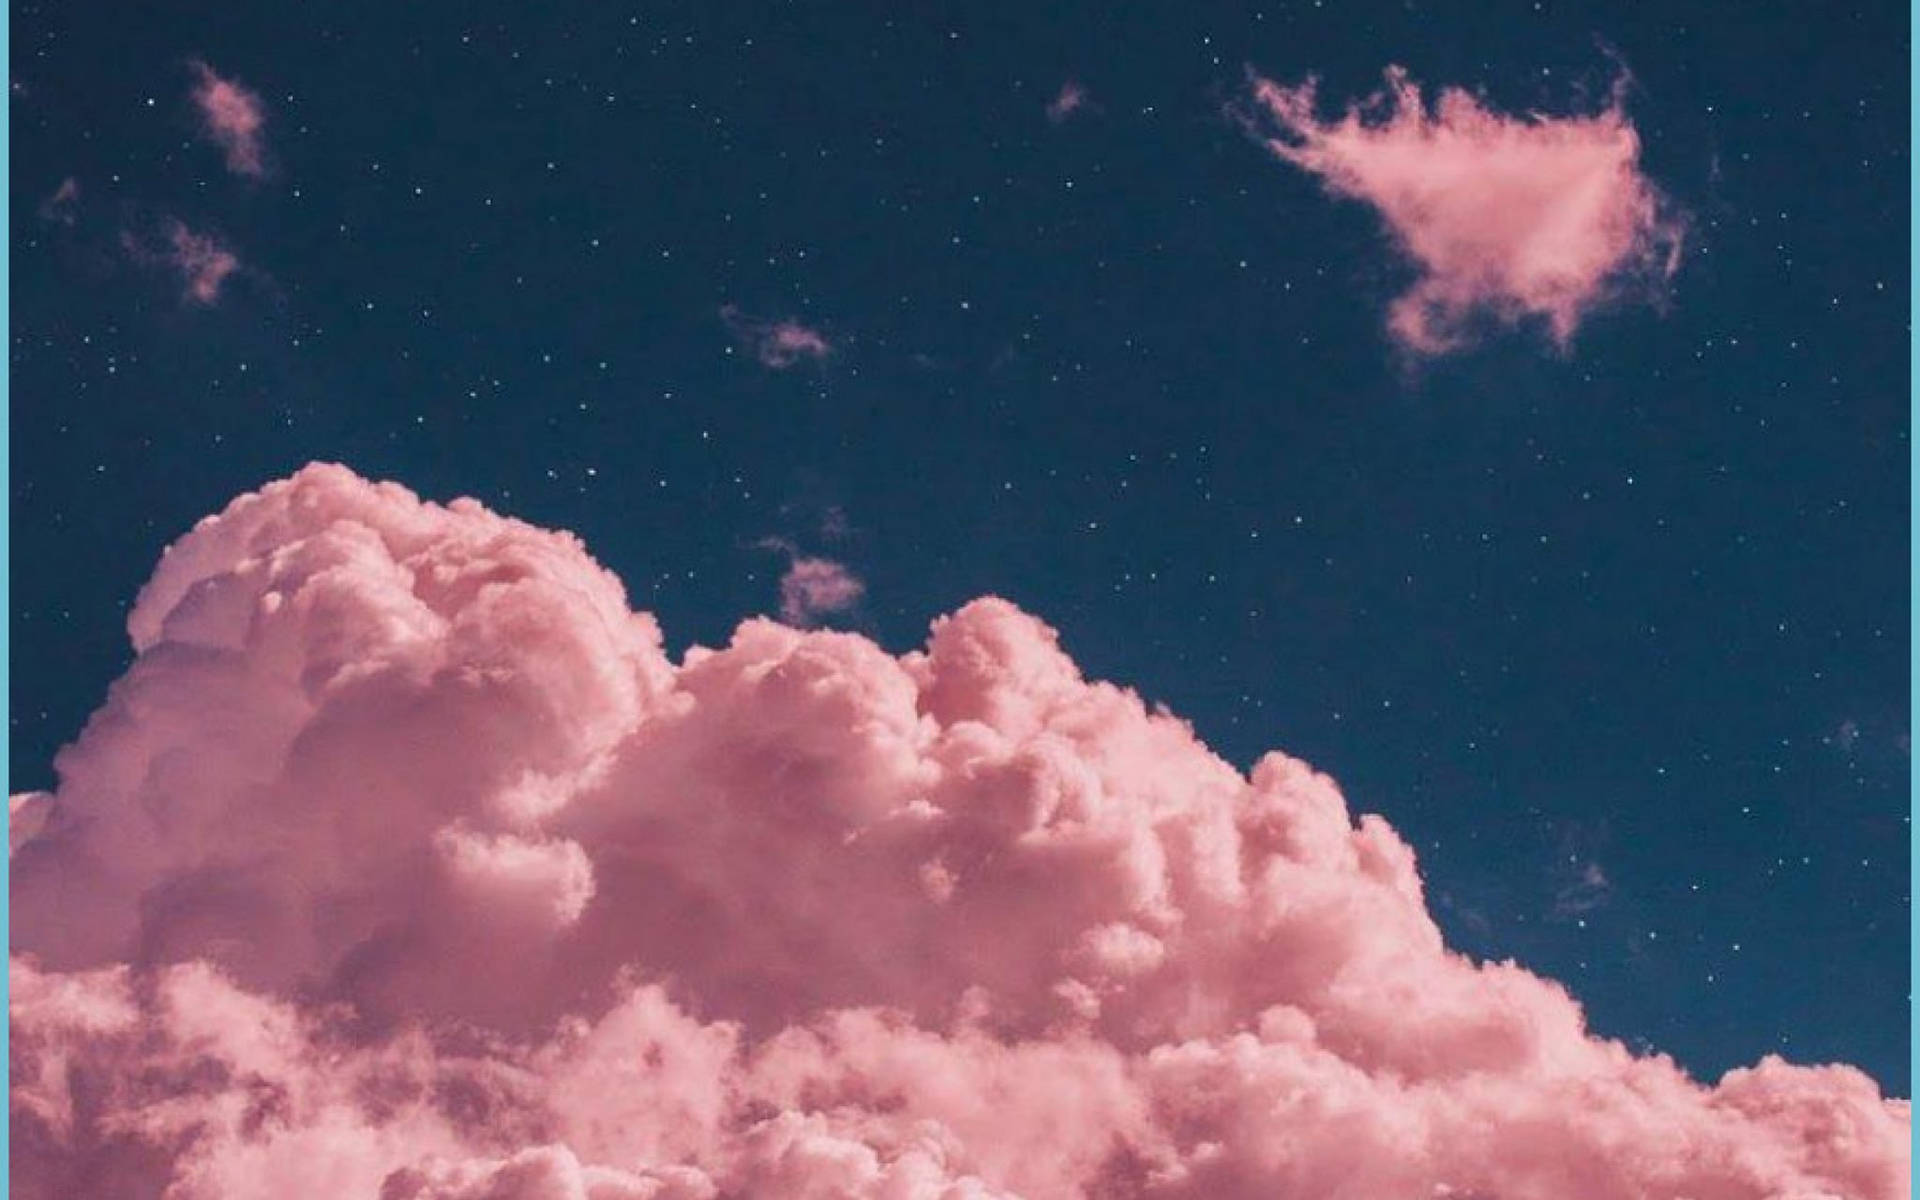 Vintage Aesthetic Clouds Starry Sky Background